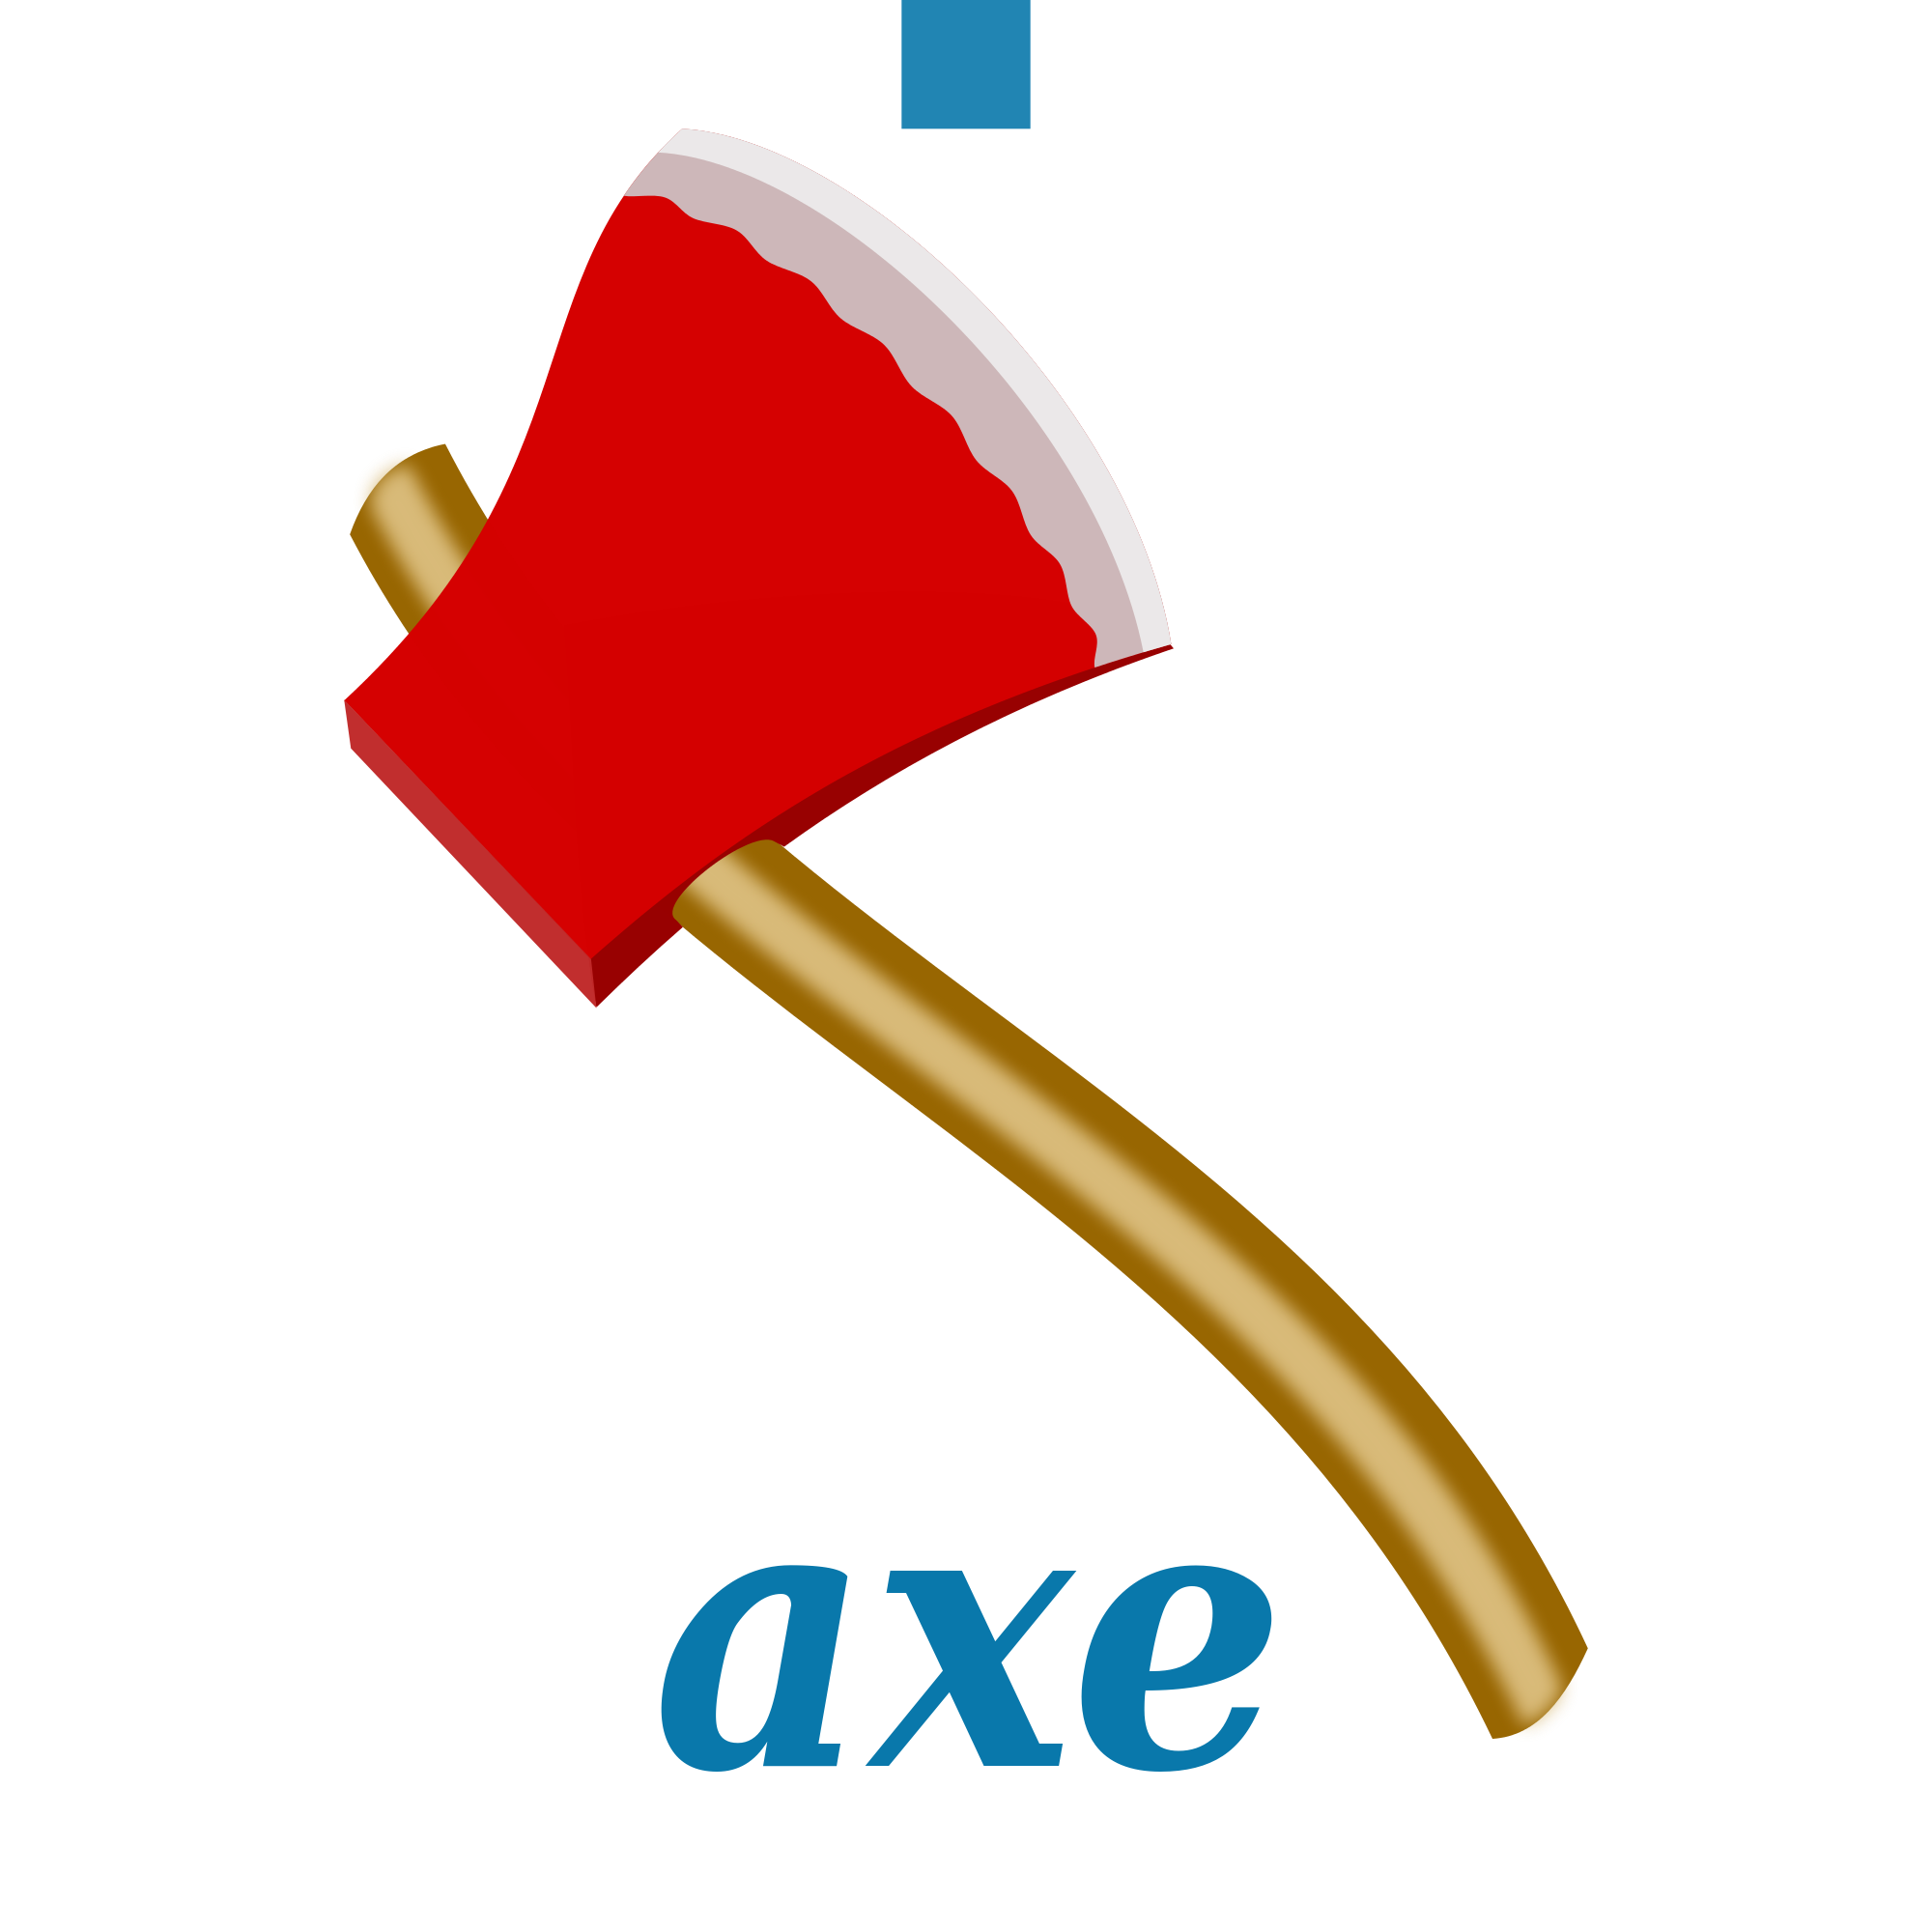 Axe svg #12, Download drawings